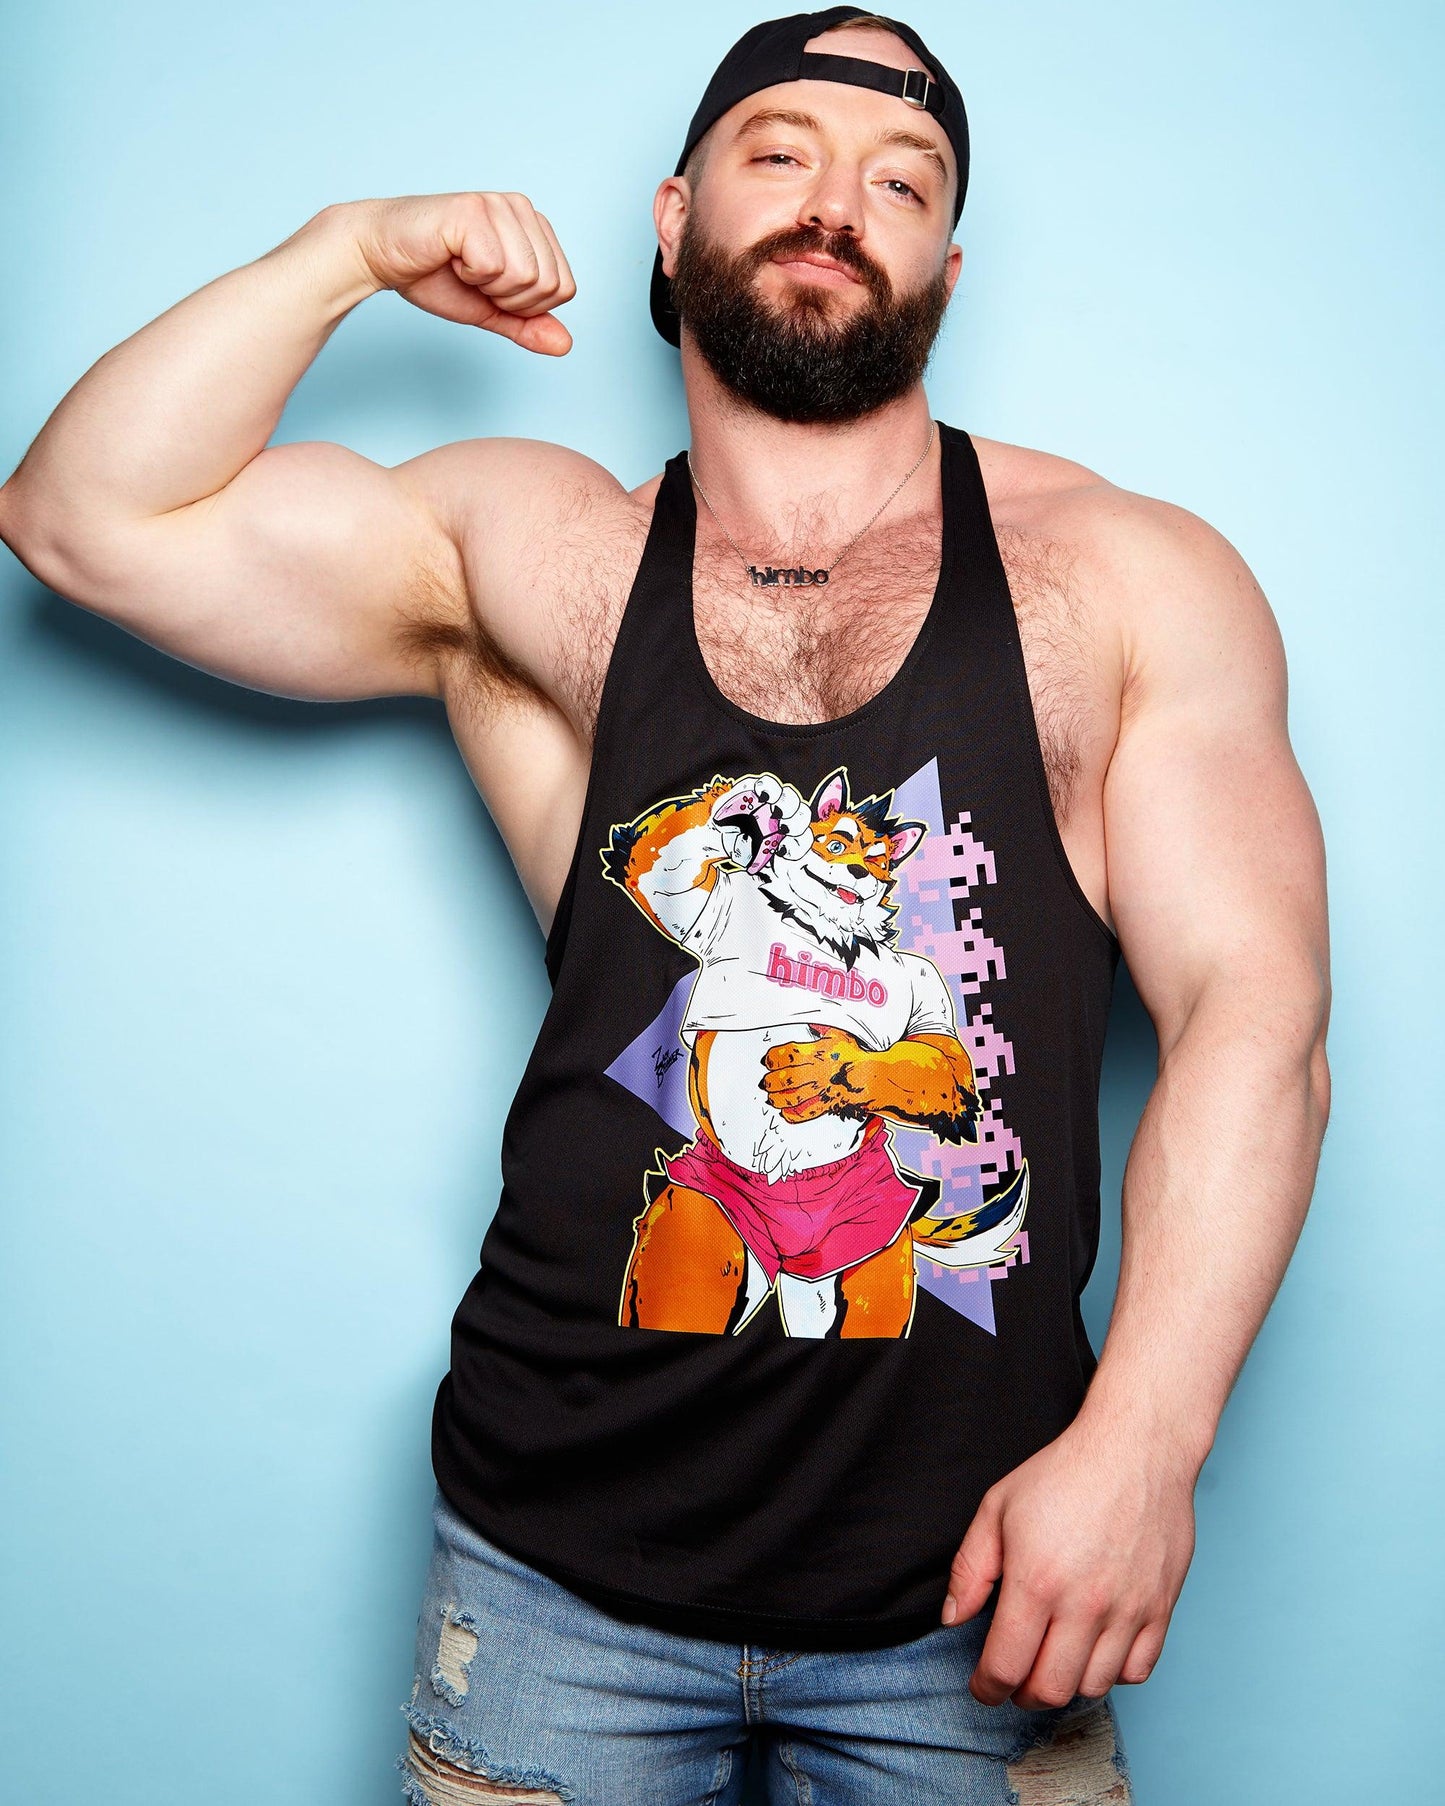 ZACH BRUNNER! thickems gaymer pup wants to play - tank.